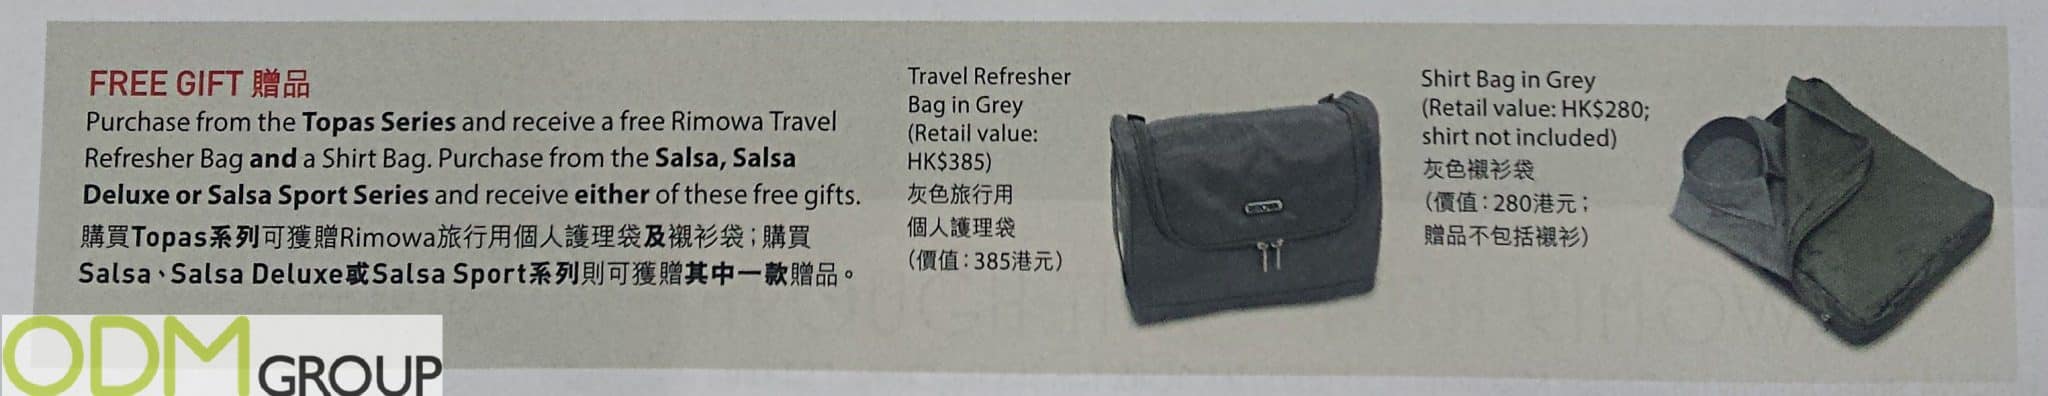 Magazine Promotion: Rimowa Branded Bags 